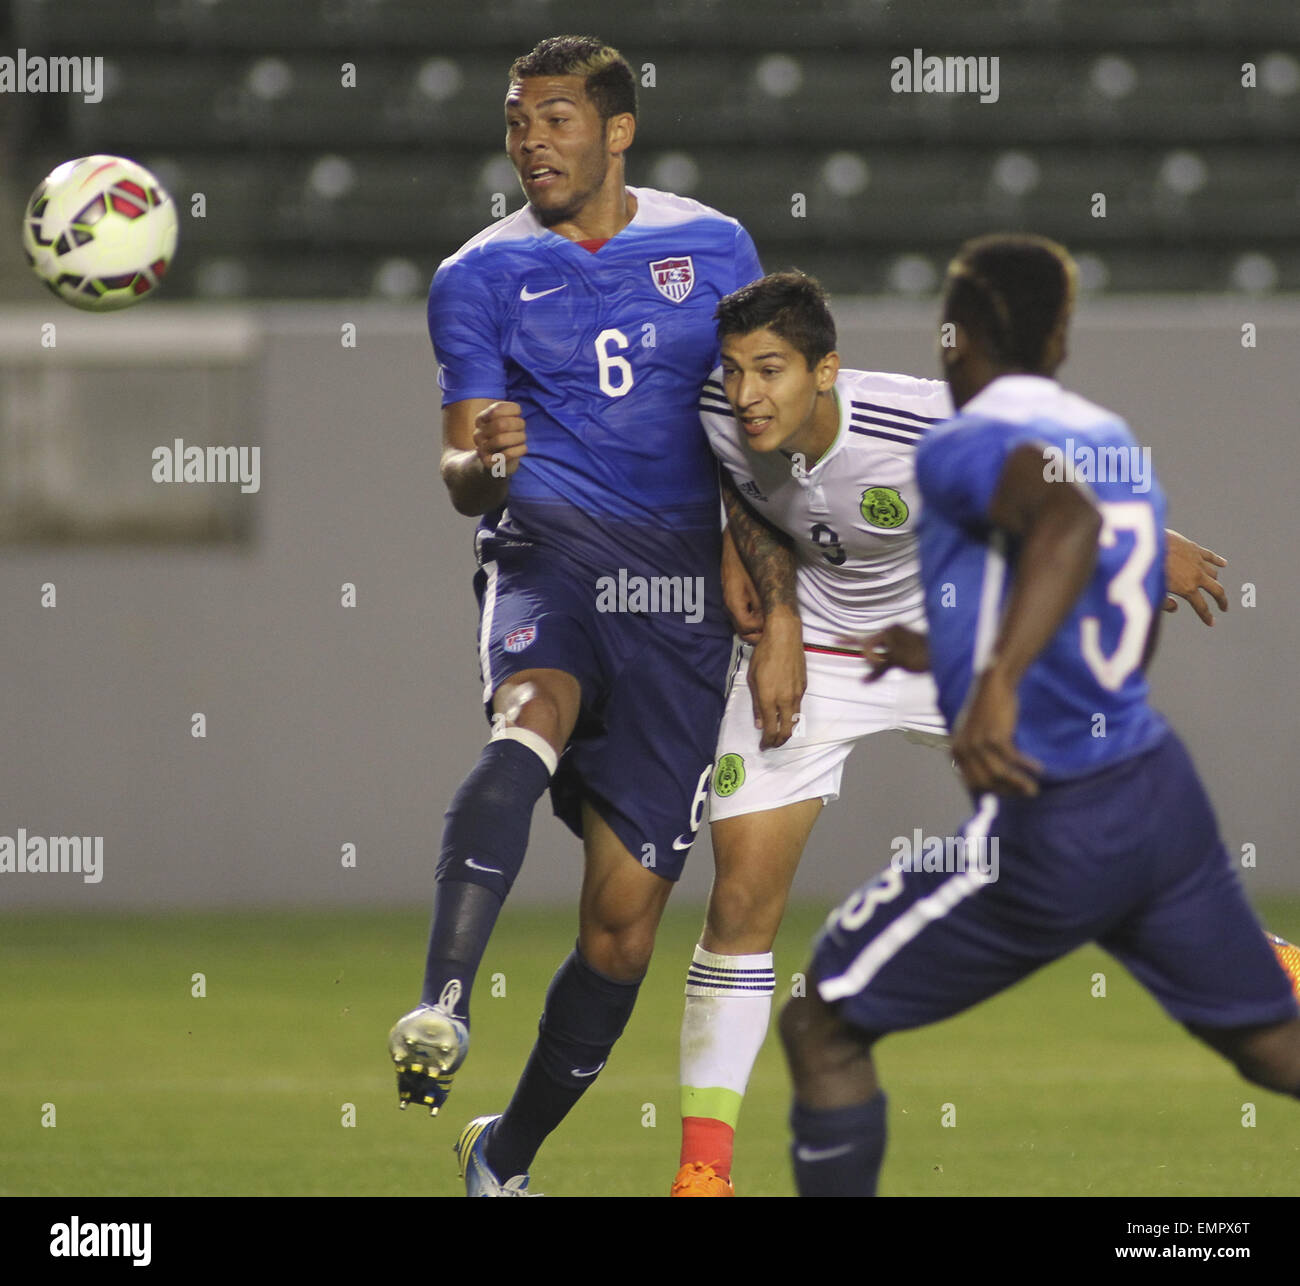 Los Angeles, California, USA. 22nd Apr, 2015. United States' Christian Dean #6 actions against Mexico's çngel Zaldivar #9 during a men's national team international friendly match, April 22, 2015, at StubHub Center in Carson, California. United States won 3-0. Credit:  Ringo Chiu/ZUMA Wire/Alamy Live News Stock Photo